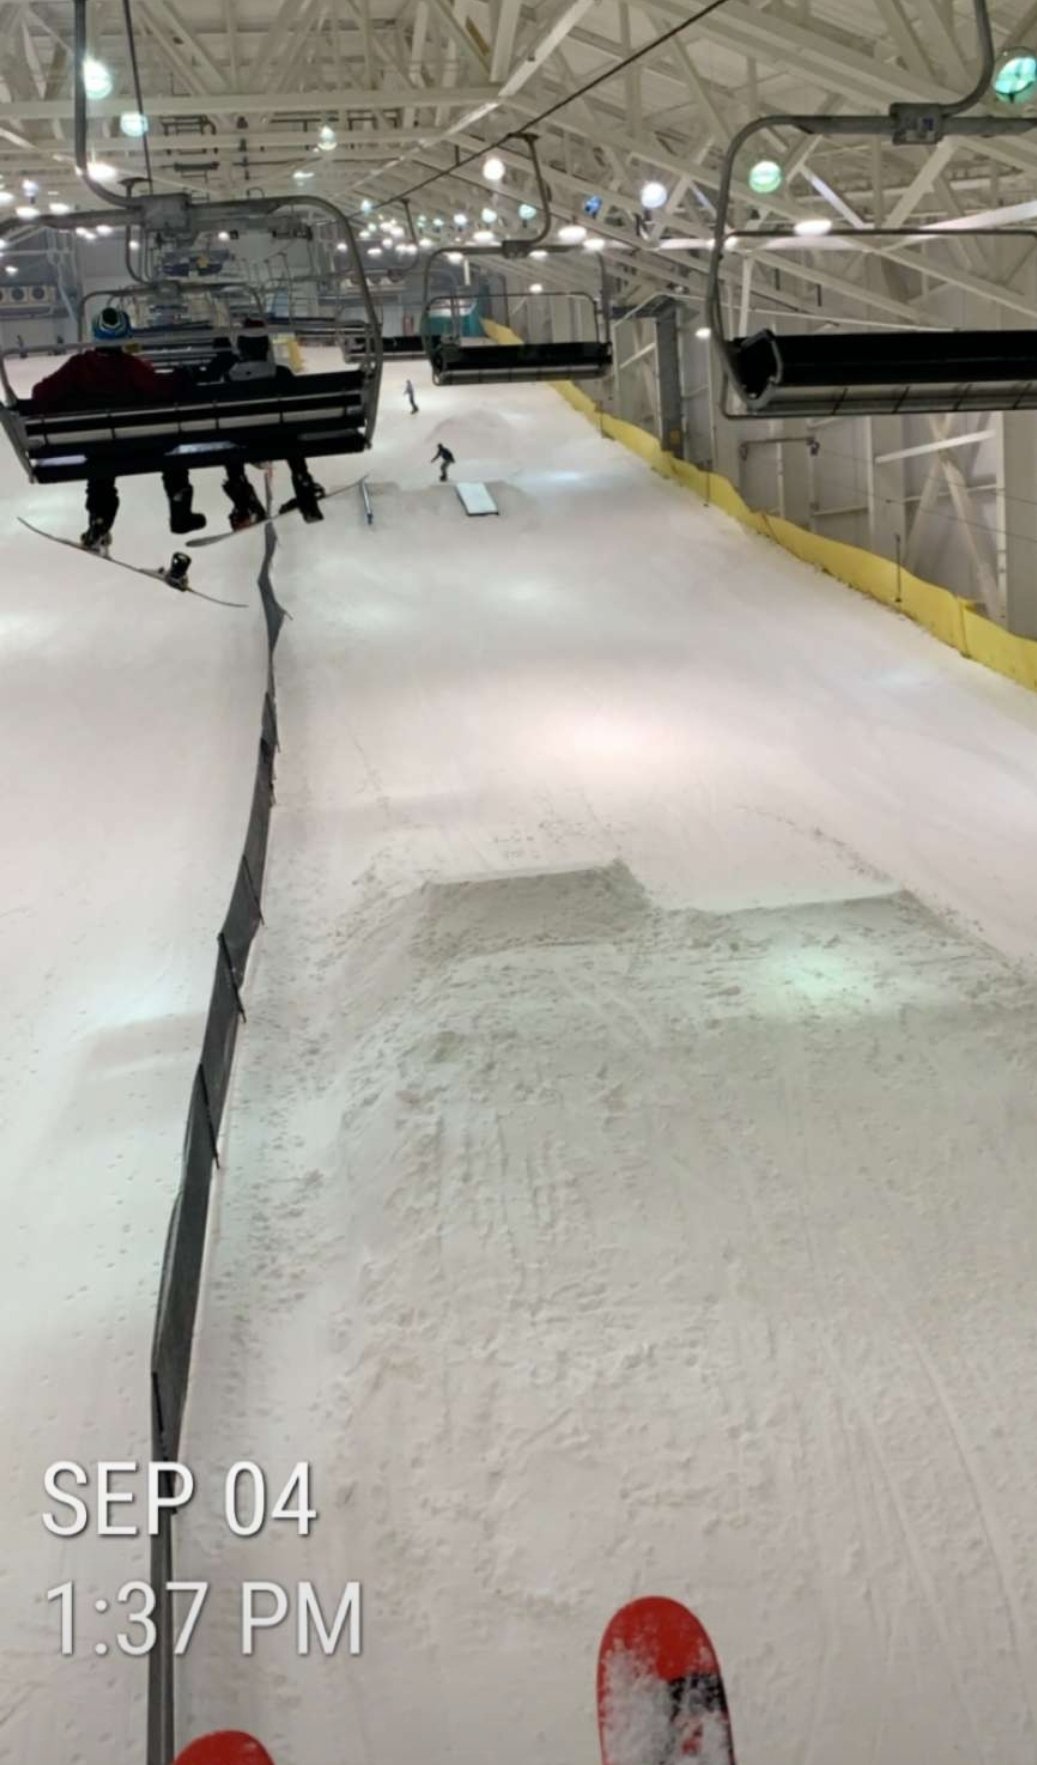 First Indoor Ski Slope in North America